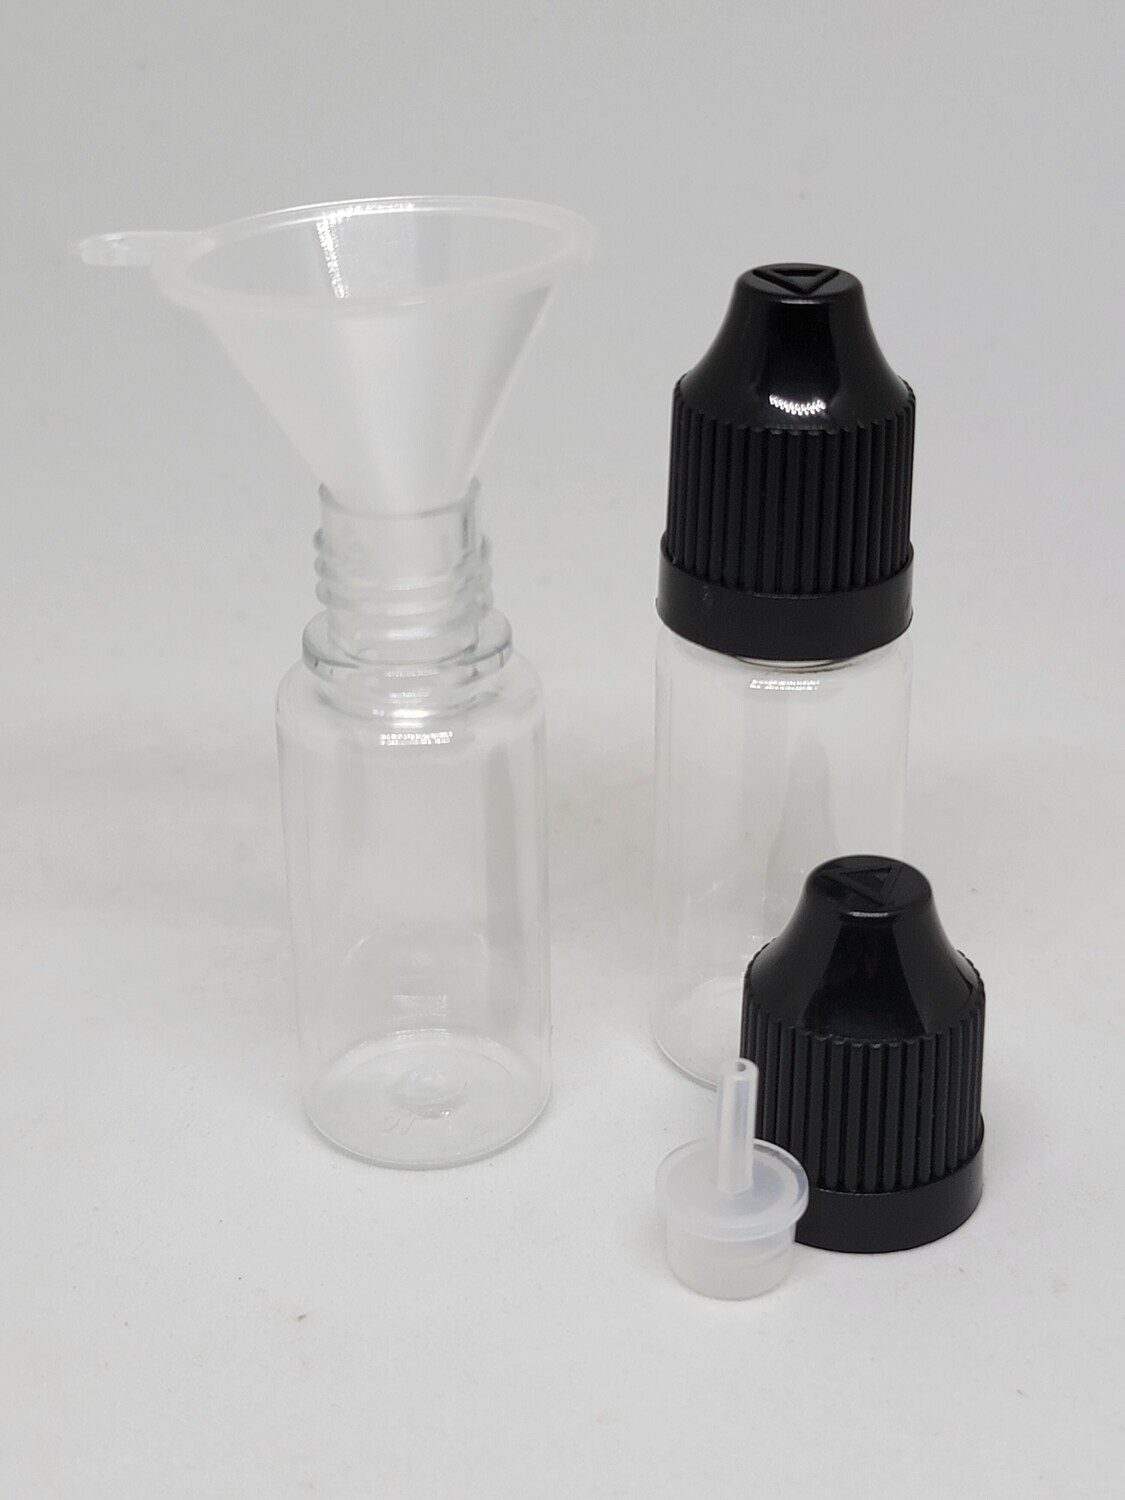 10mL Sample Dropper CLEAR PET(Soft Plastic) BLACK CAP - with Childproof Caps PACK OF 50 & 10 MINI FUNNELS